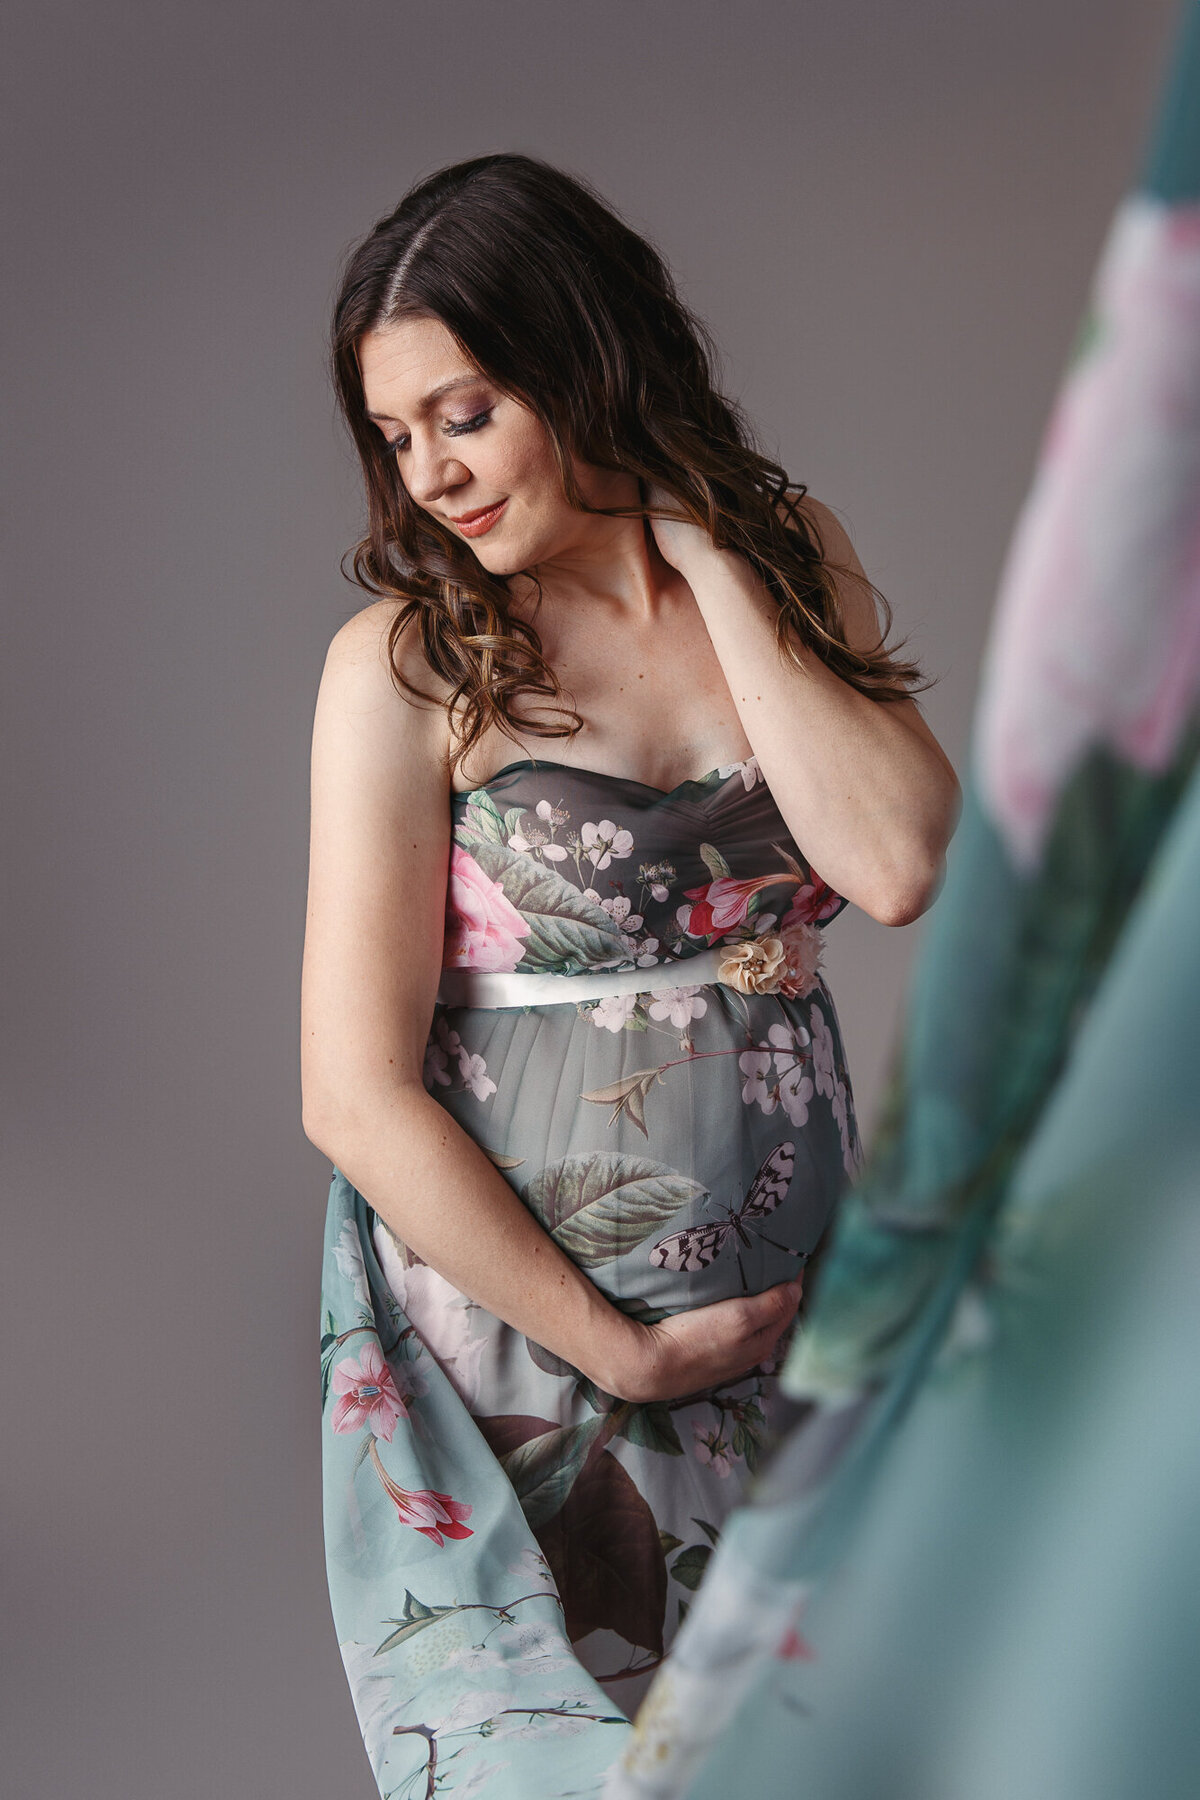 Portrait of a pregnant woman looking beautiful in a green floral dress